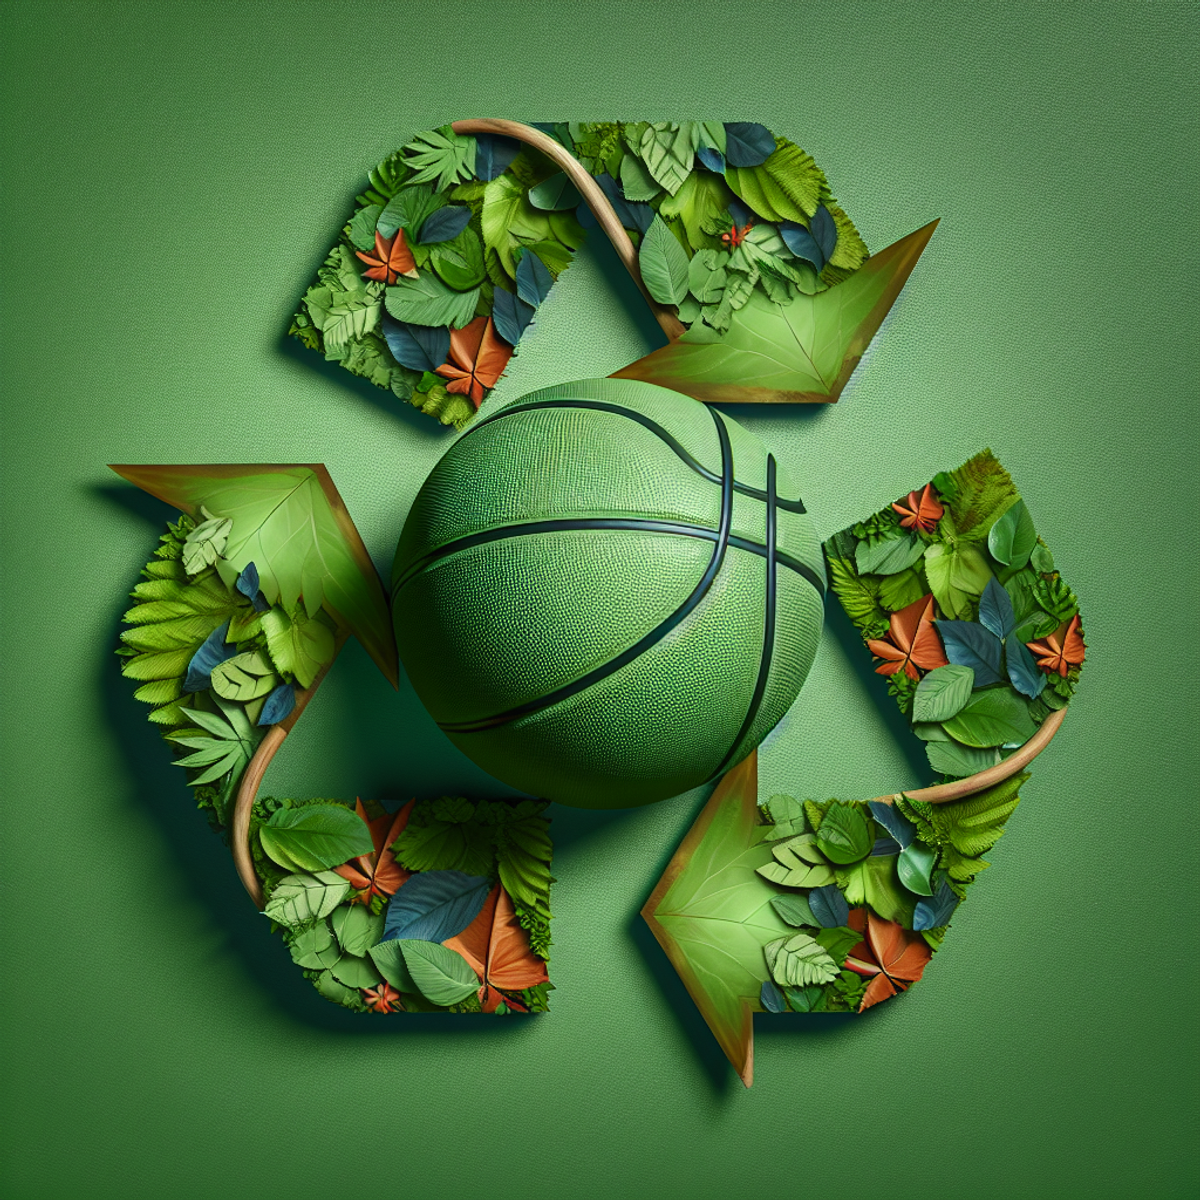 An eco-friendly basketball made from sustainable materials, surrounded by lush green foliage and an abstract recycling symbol.